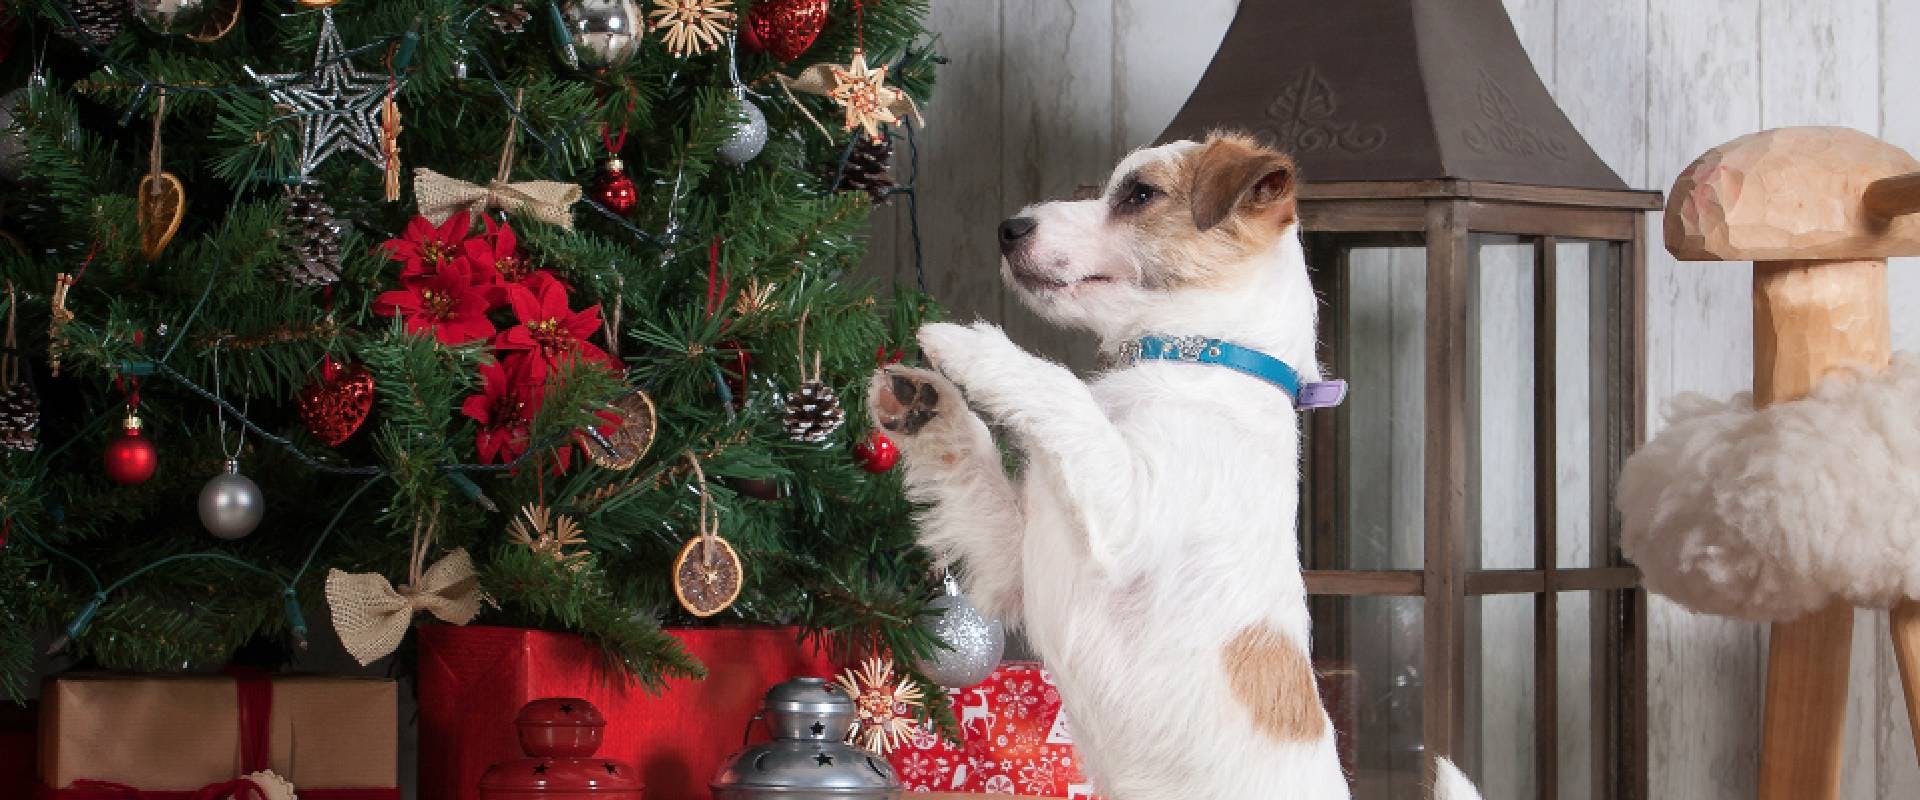 Jack Russell on their hind legs towards a Christmas tree